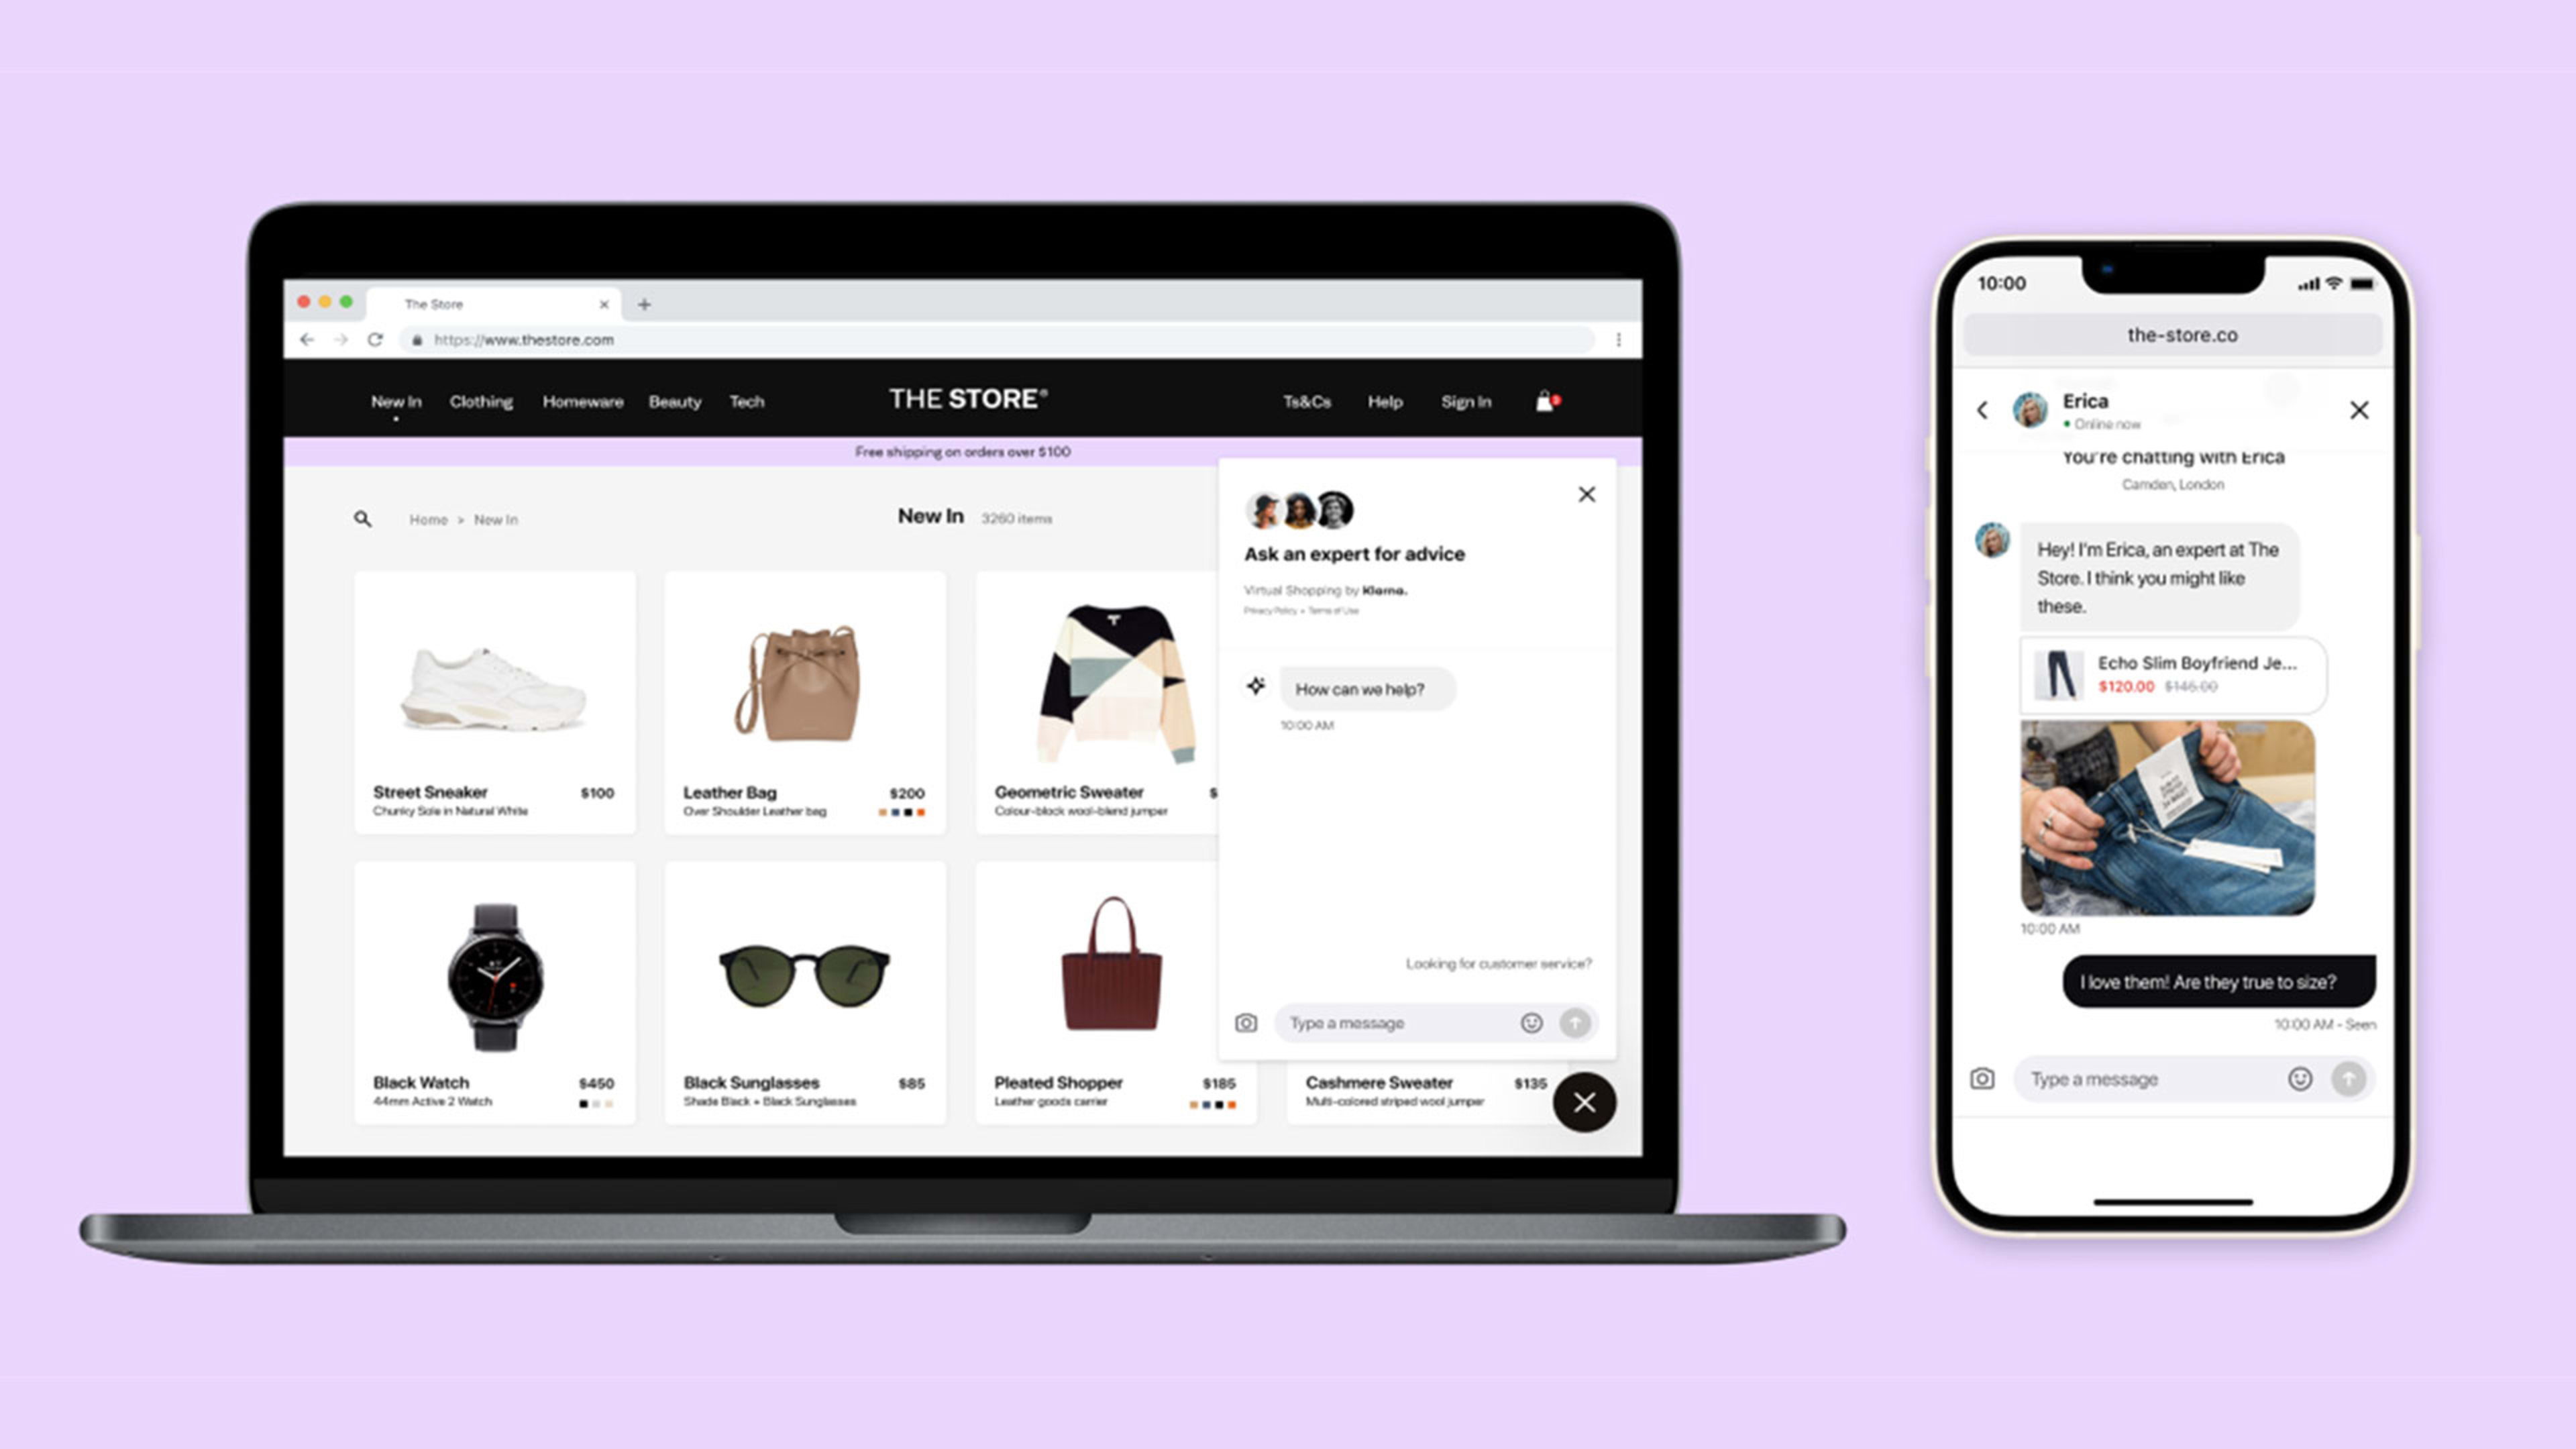 Exclusive: Klarna’s new virtual-shopping feature will connect shoppers with sales associates